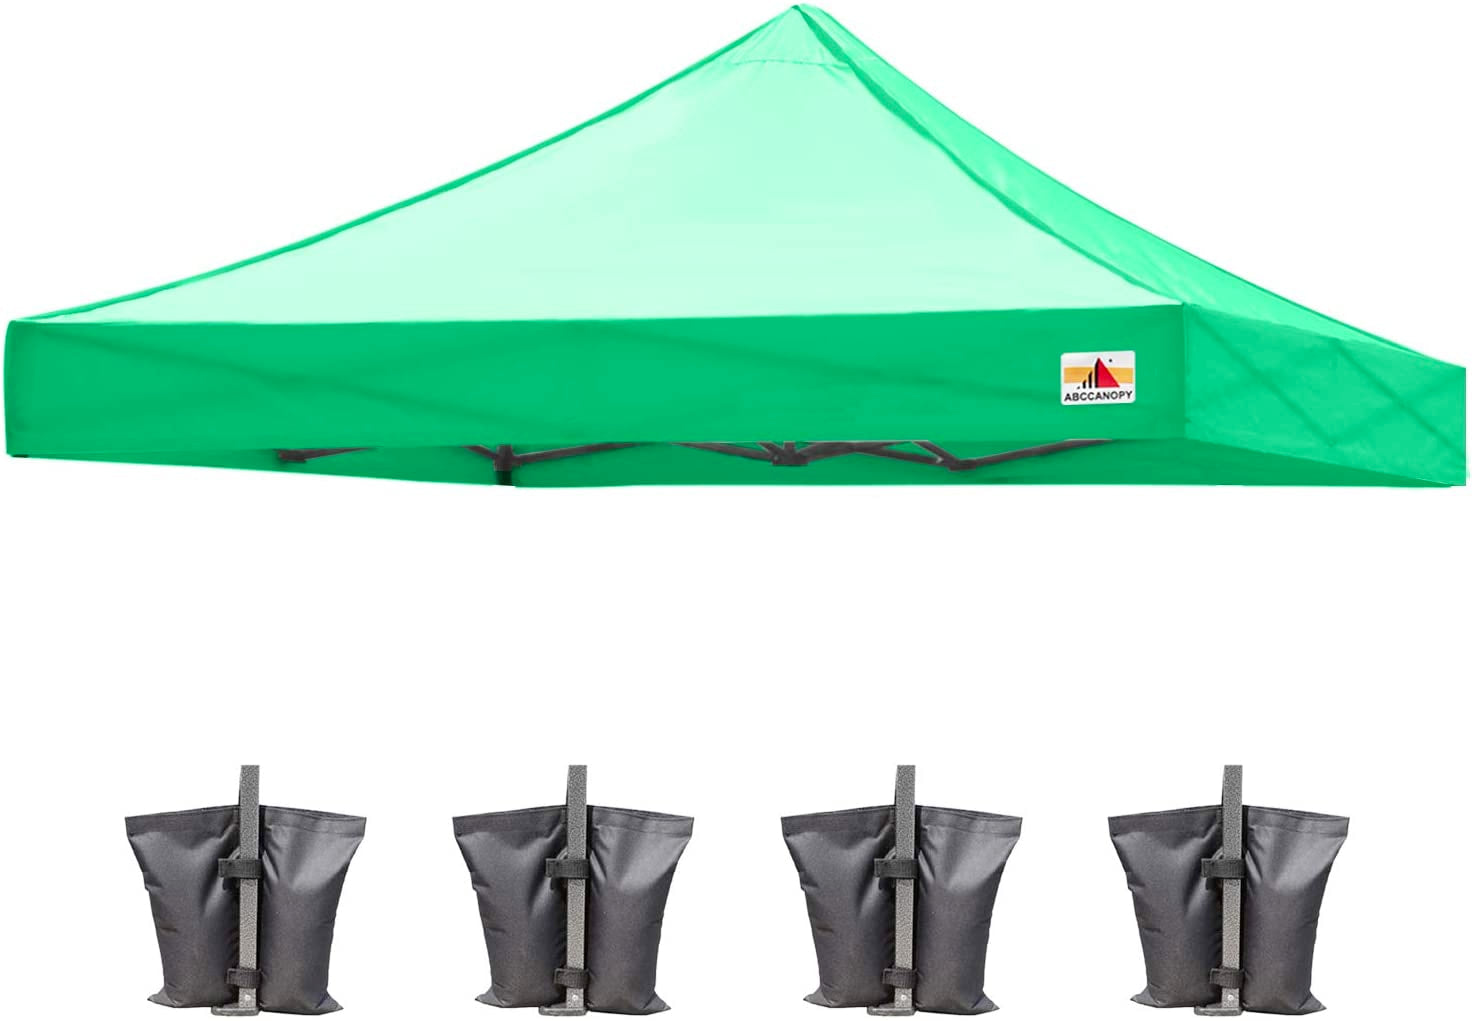 In this picture, you can see the Green Canopy TOP that is made to fit the ABCCANOPY Commercial Deluxe 10x10 Canopy. It not only offers functional shelter but also exudes a sense of purity and elegance.